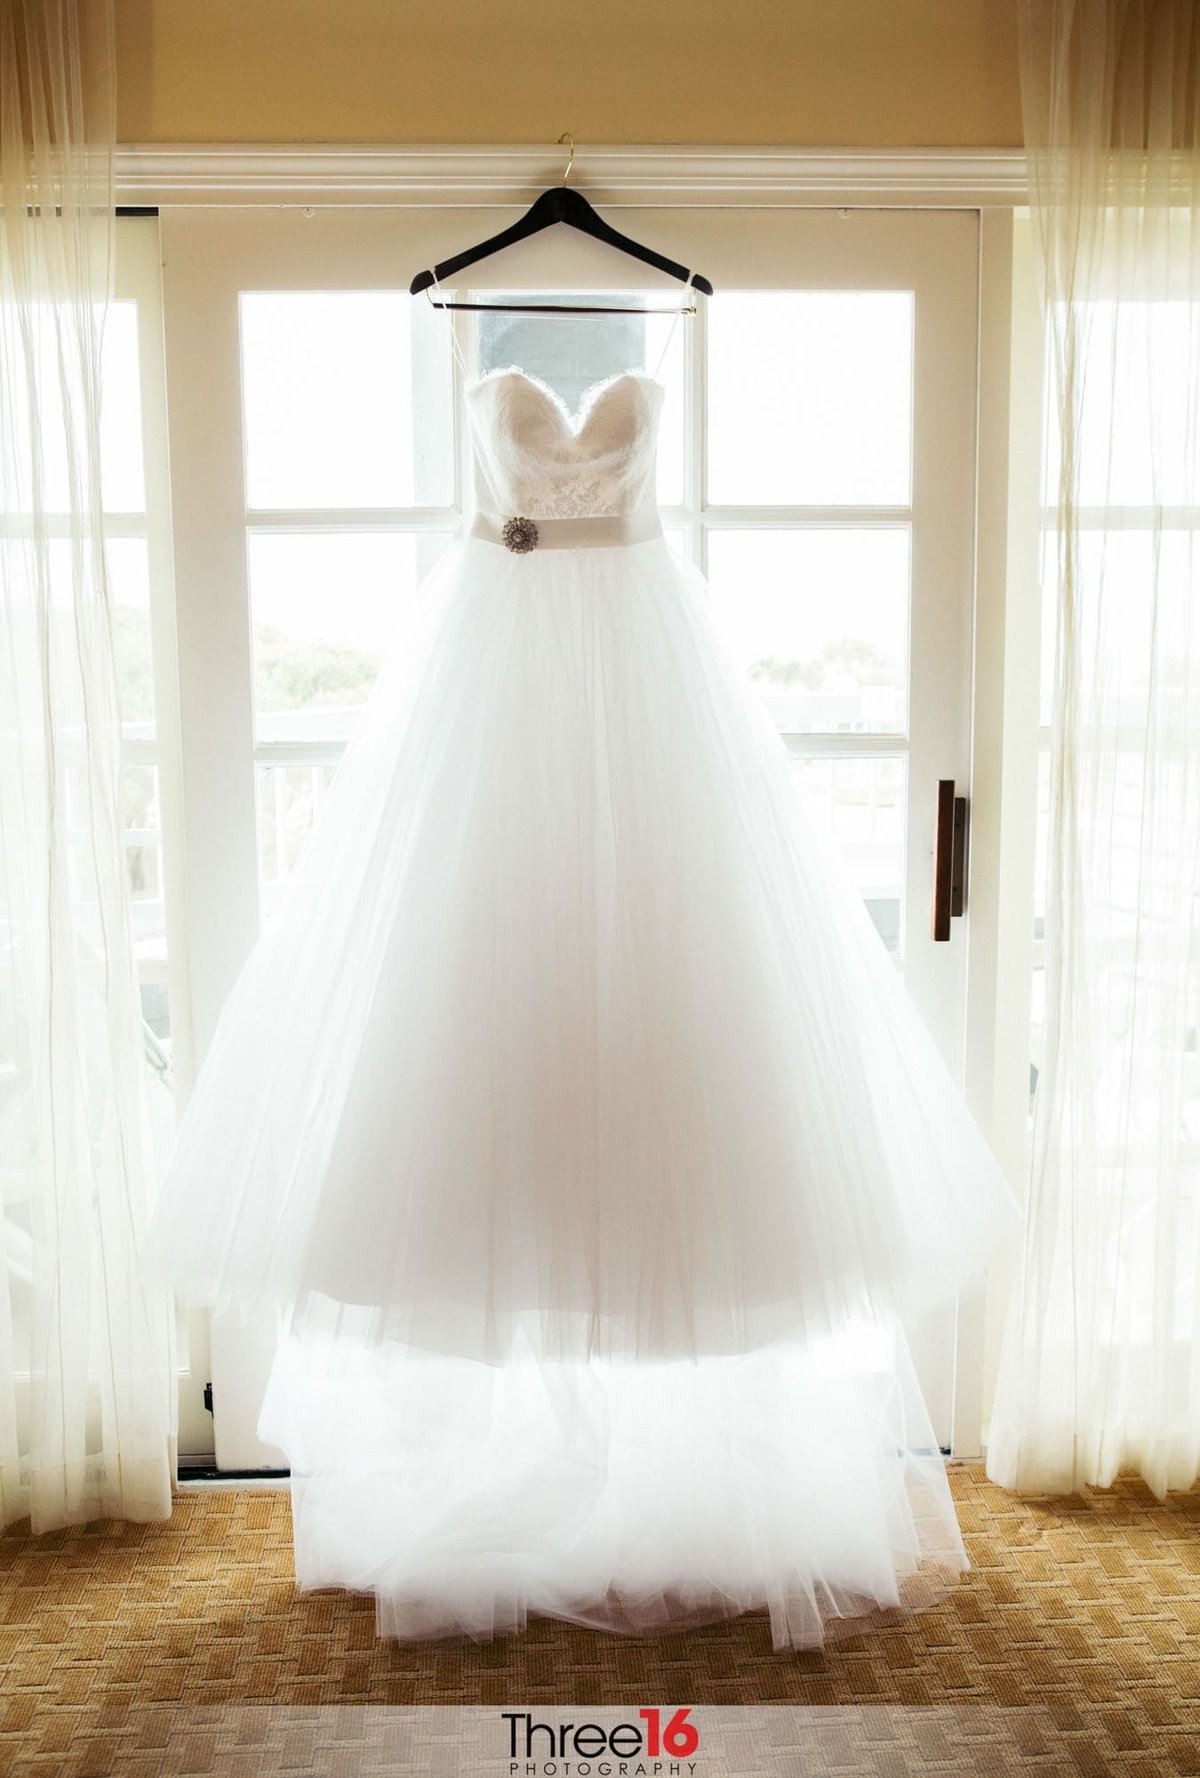 Bride's wedding dress hangs on a valance in full display